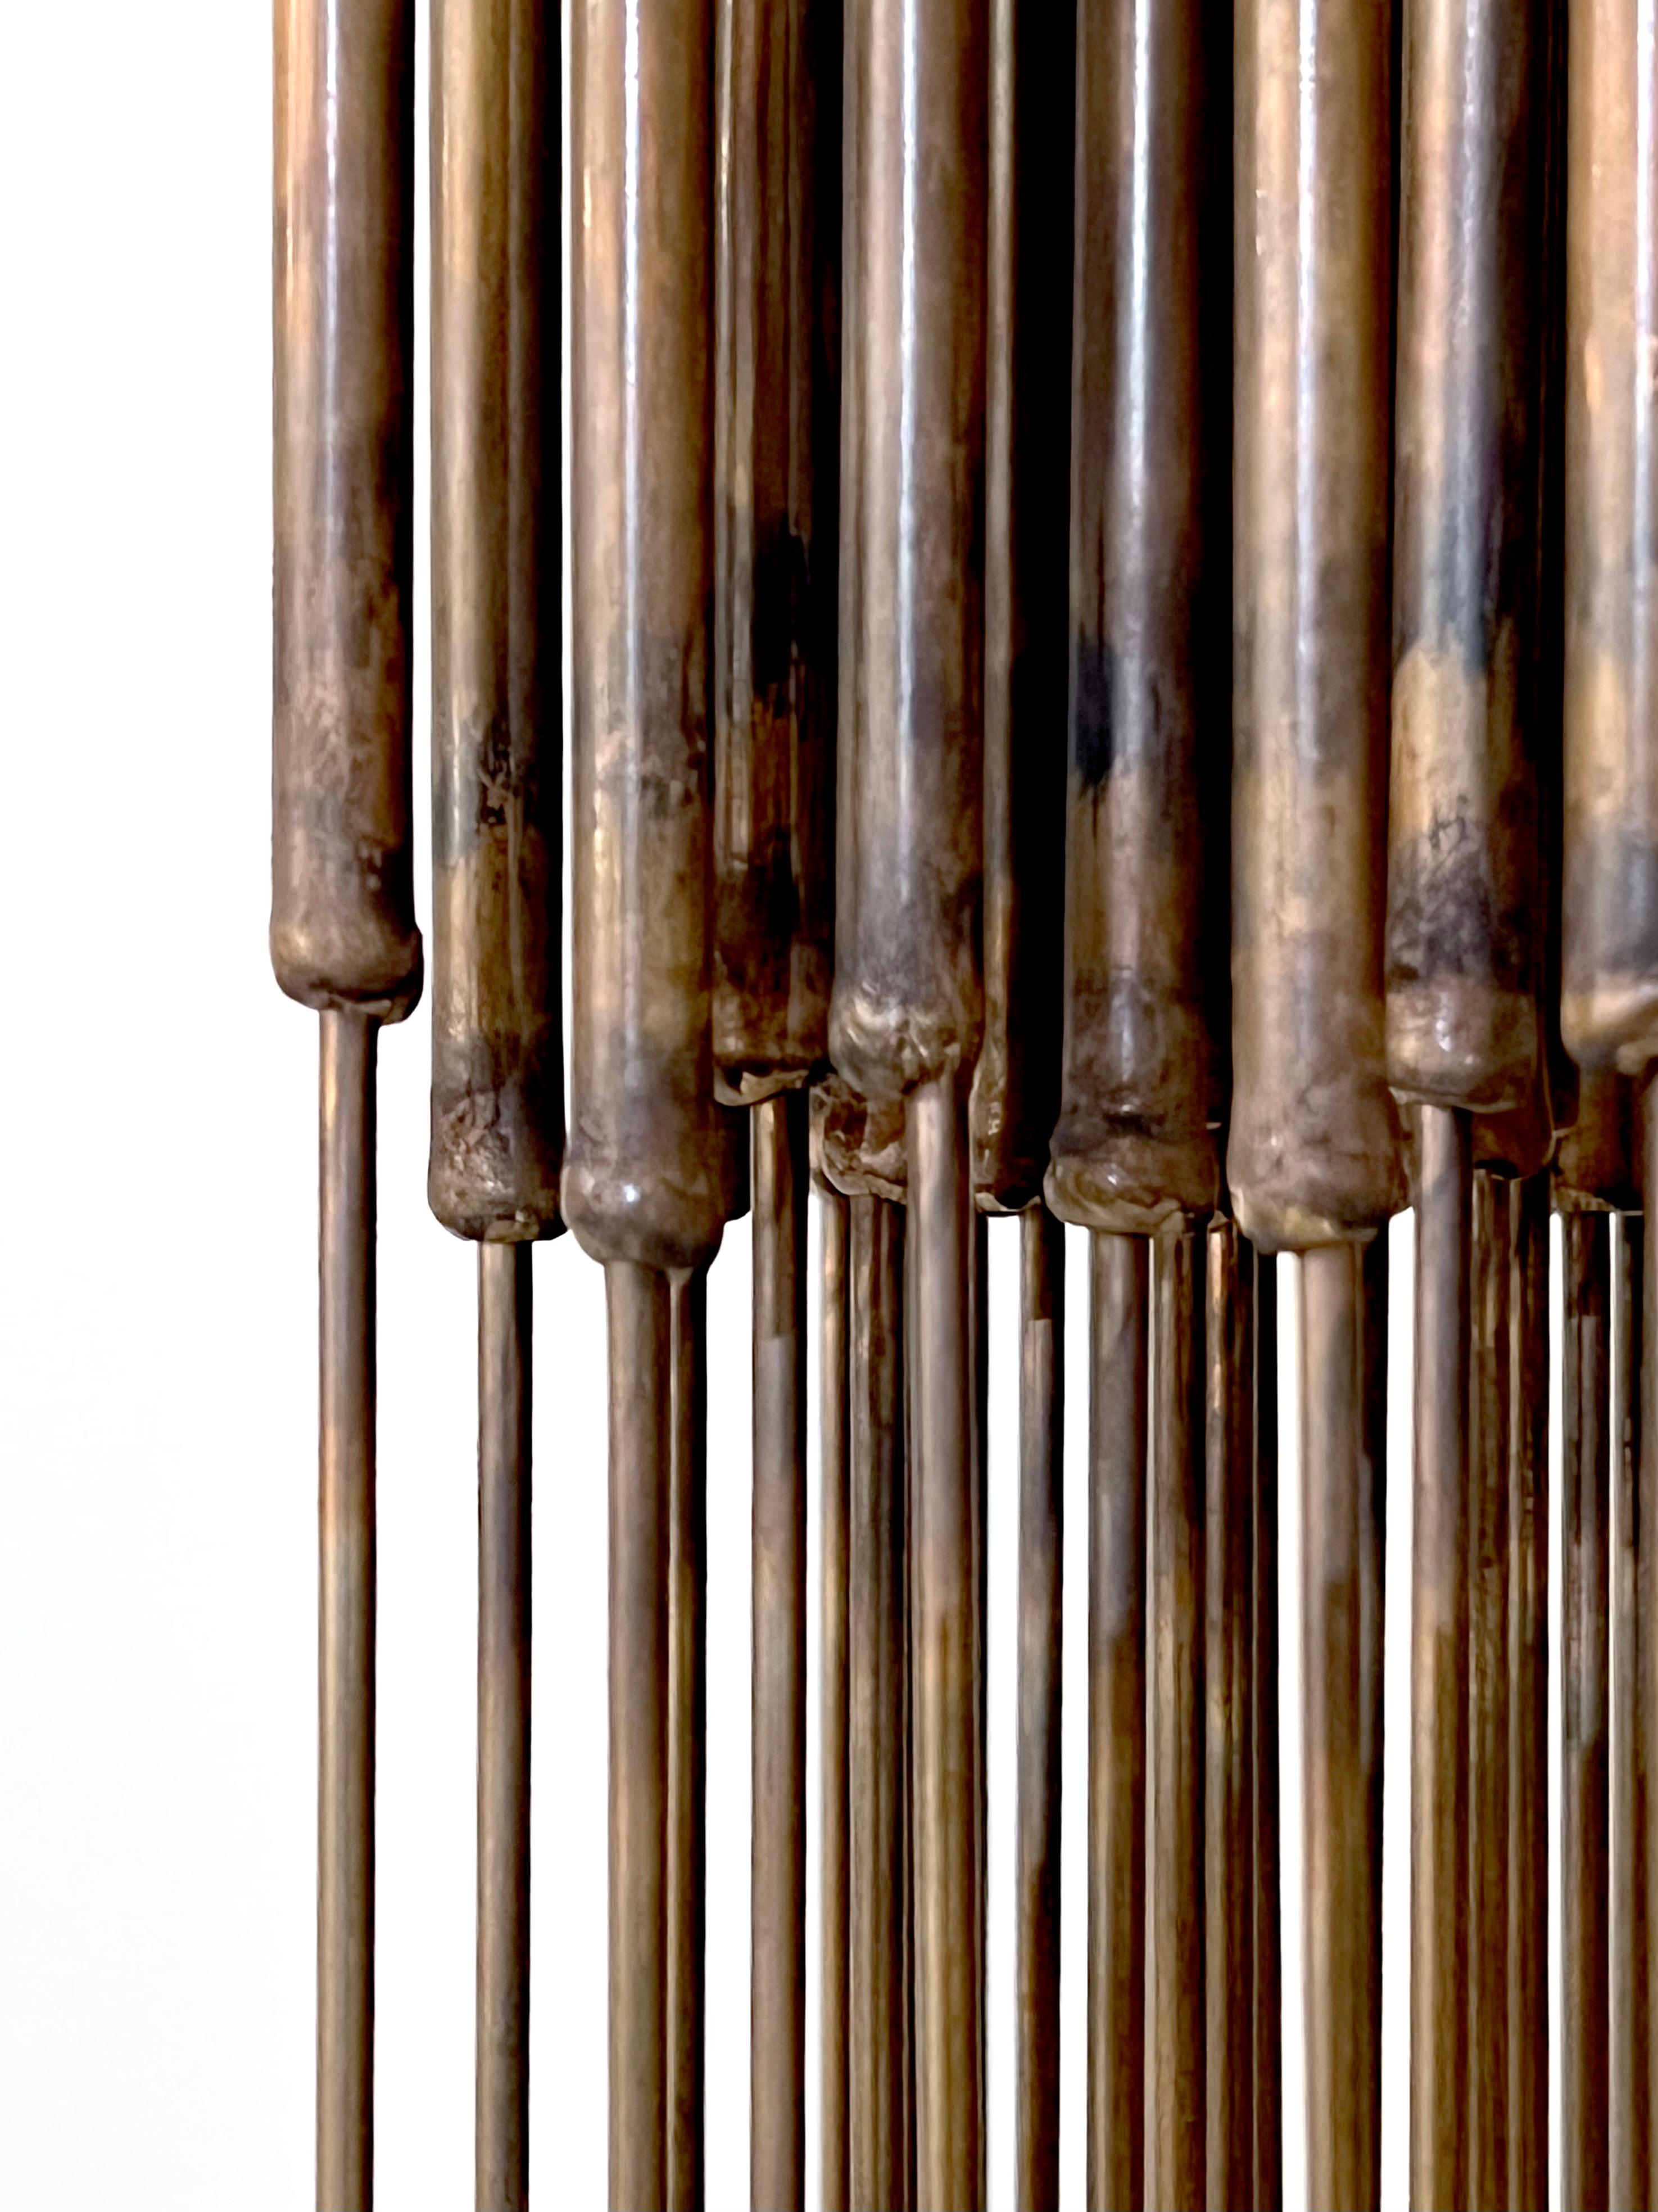 Sonambient Rods Sculpture by Harry Bertoia For Sale 4